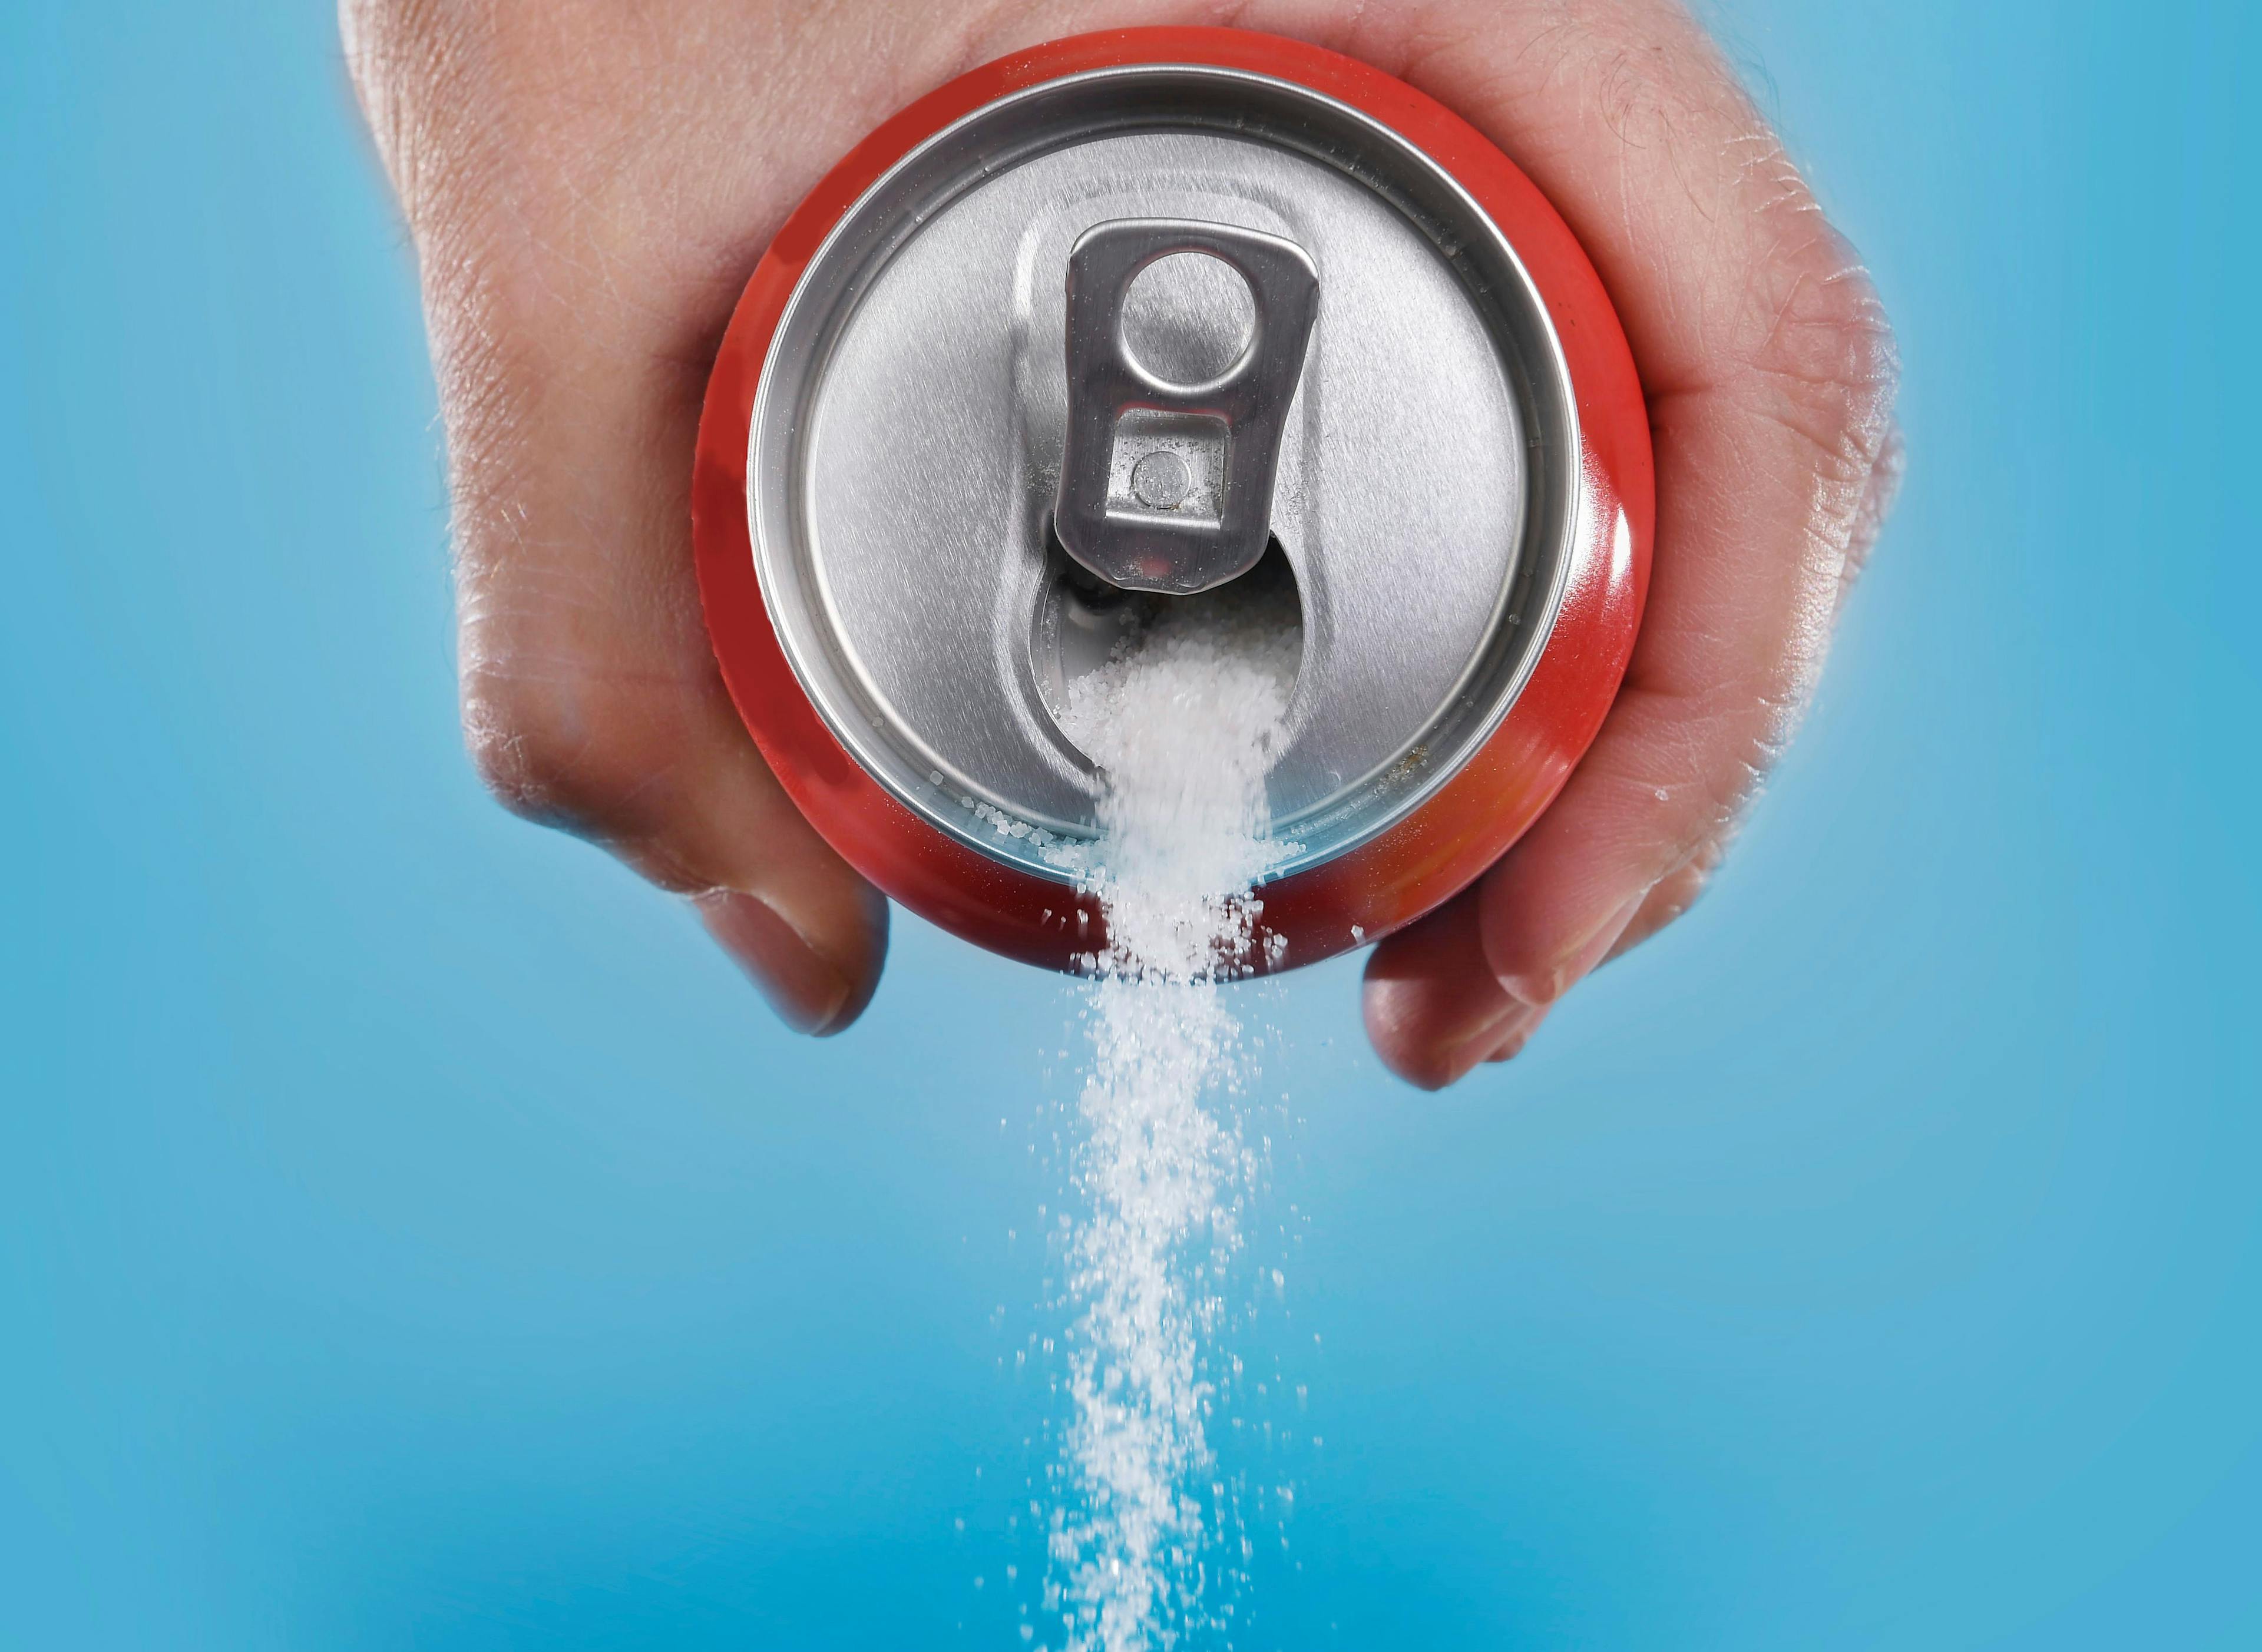 hand holding soda can pouring a crazy amount of sugar | Image Credit: Wordley Calvo Stock - stock.adobe.com